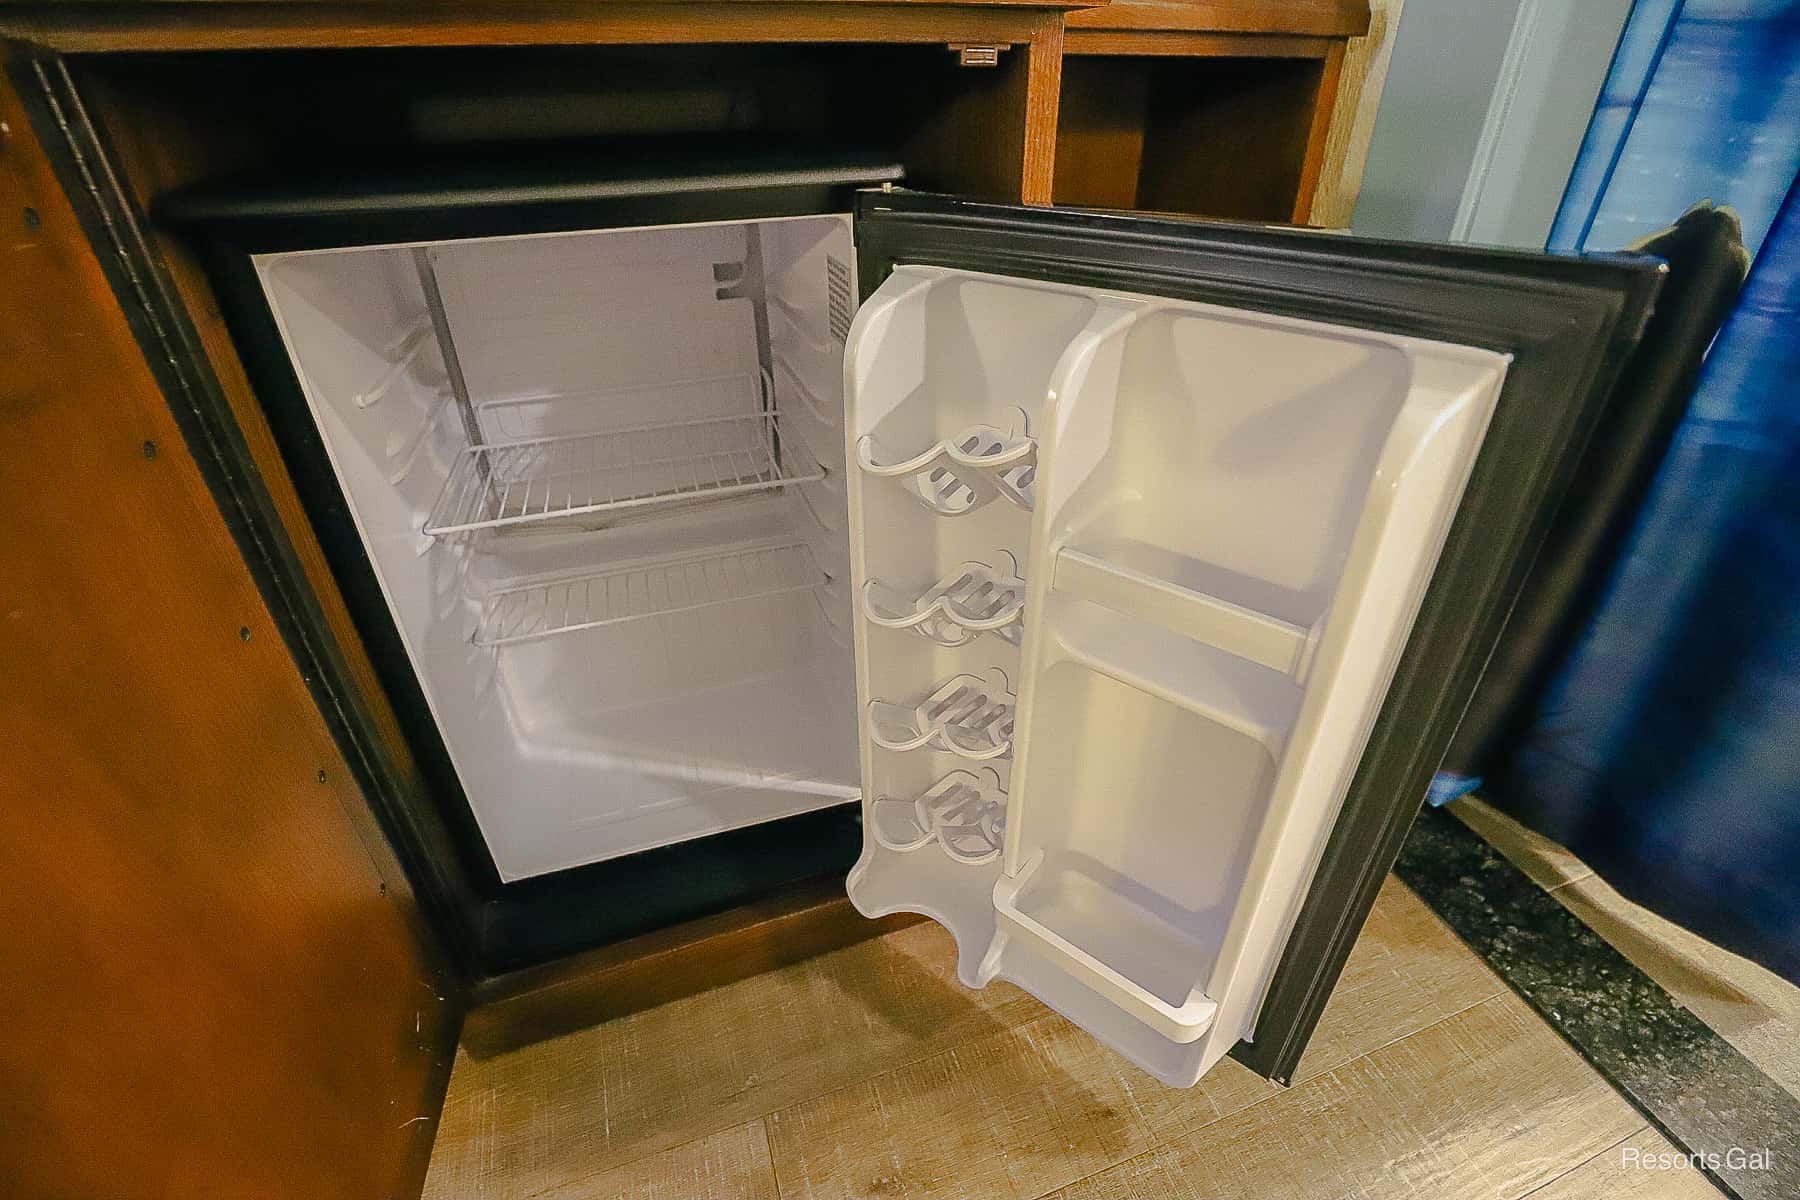 open fridge shows room to keep items cold